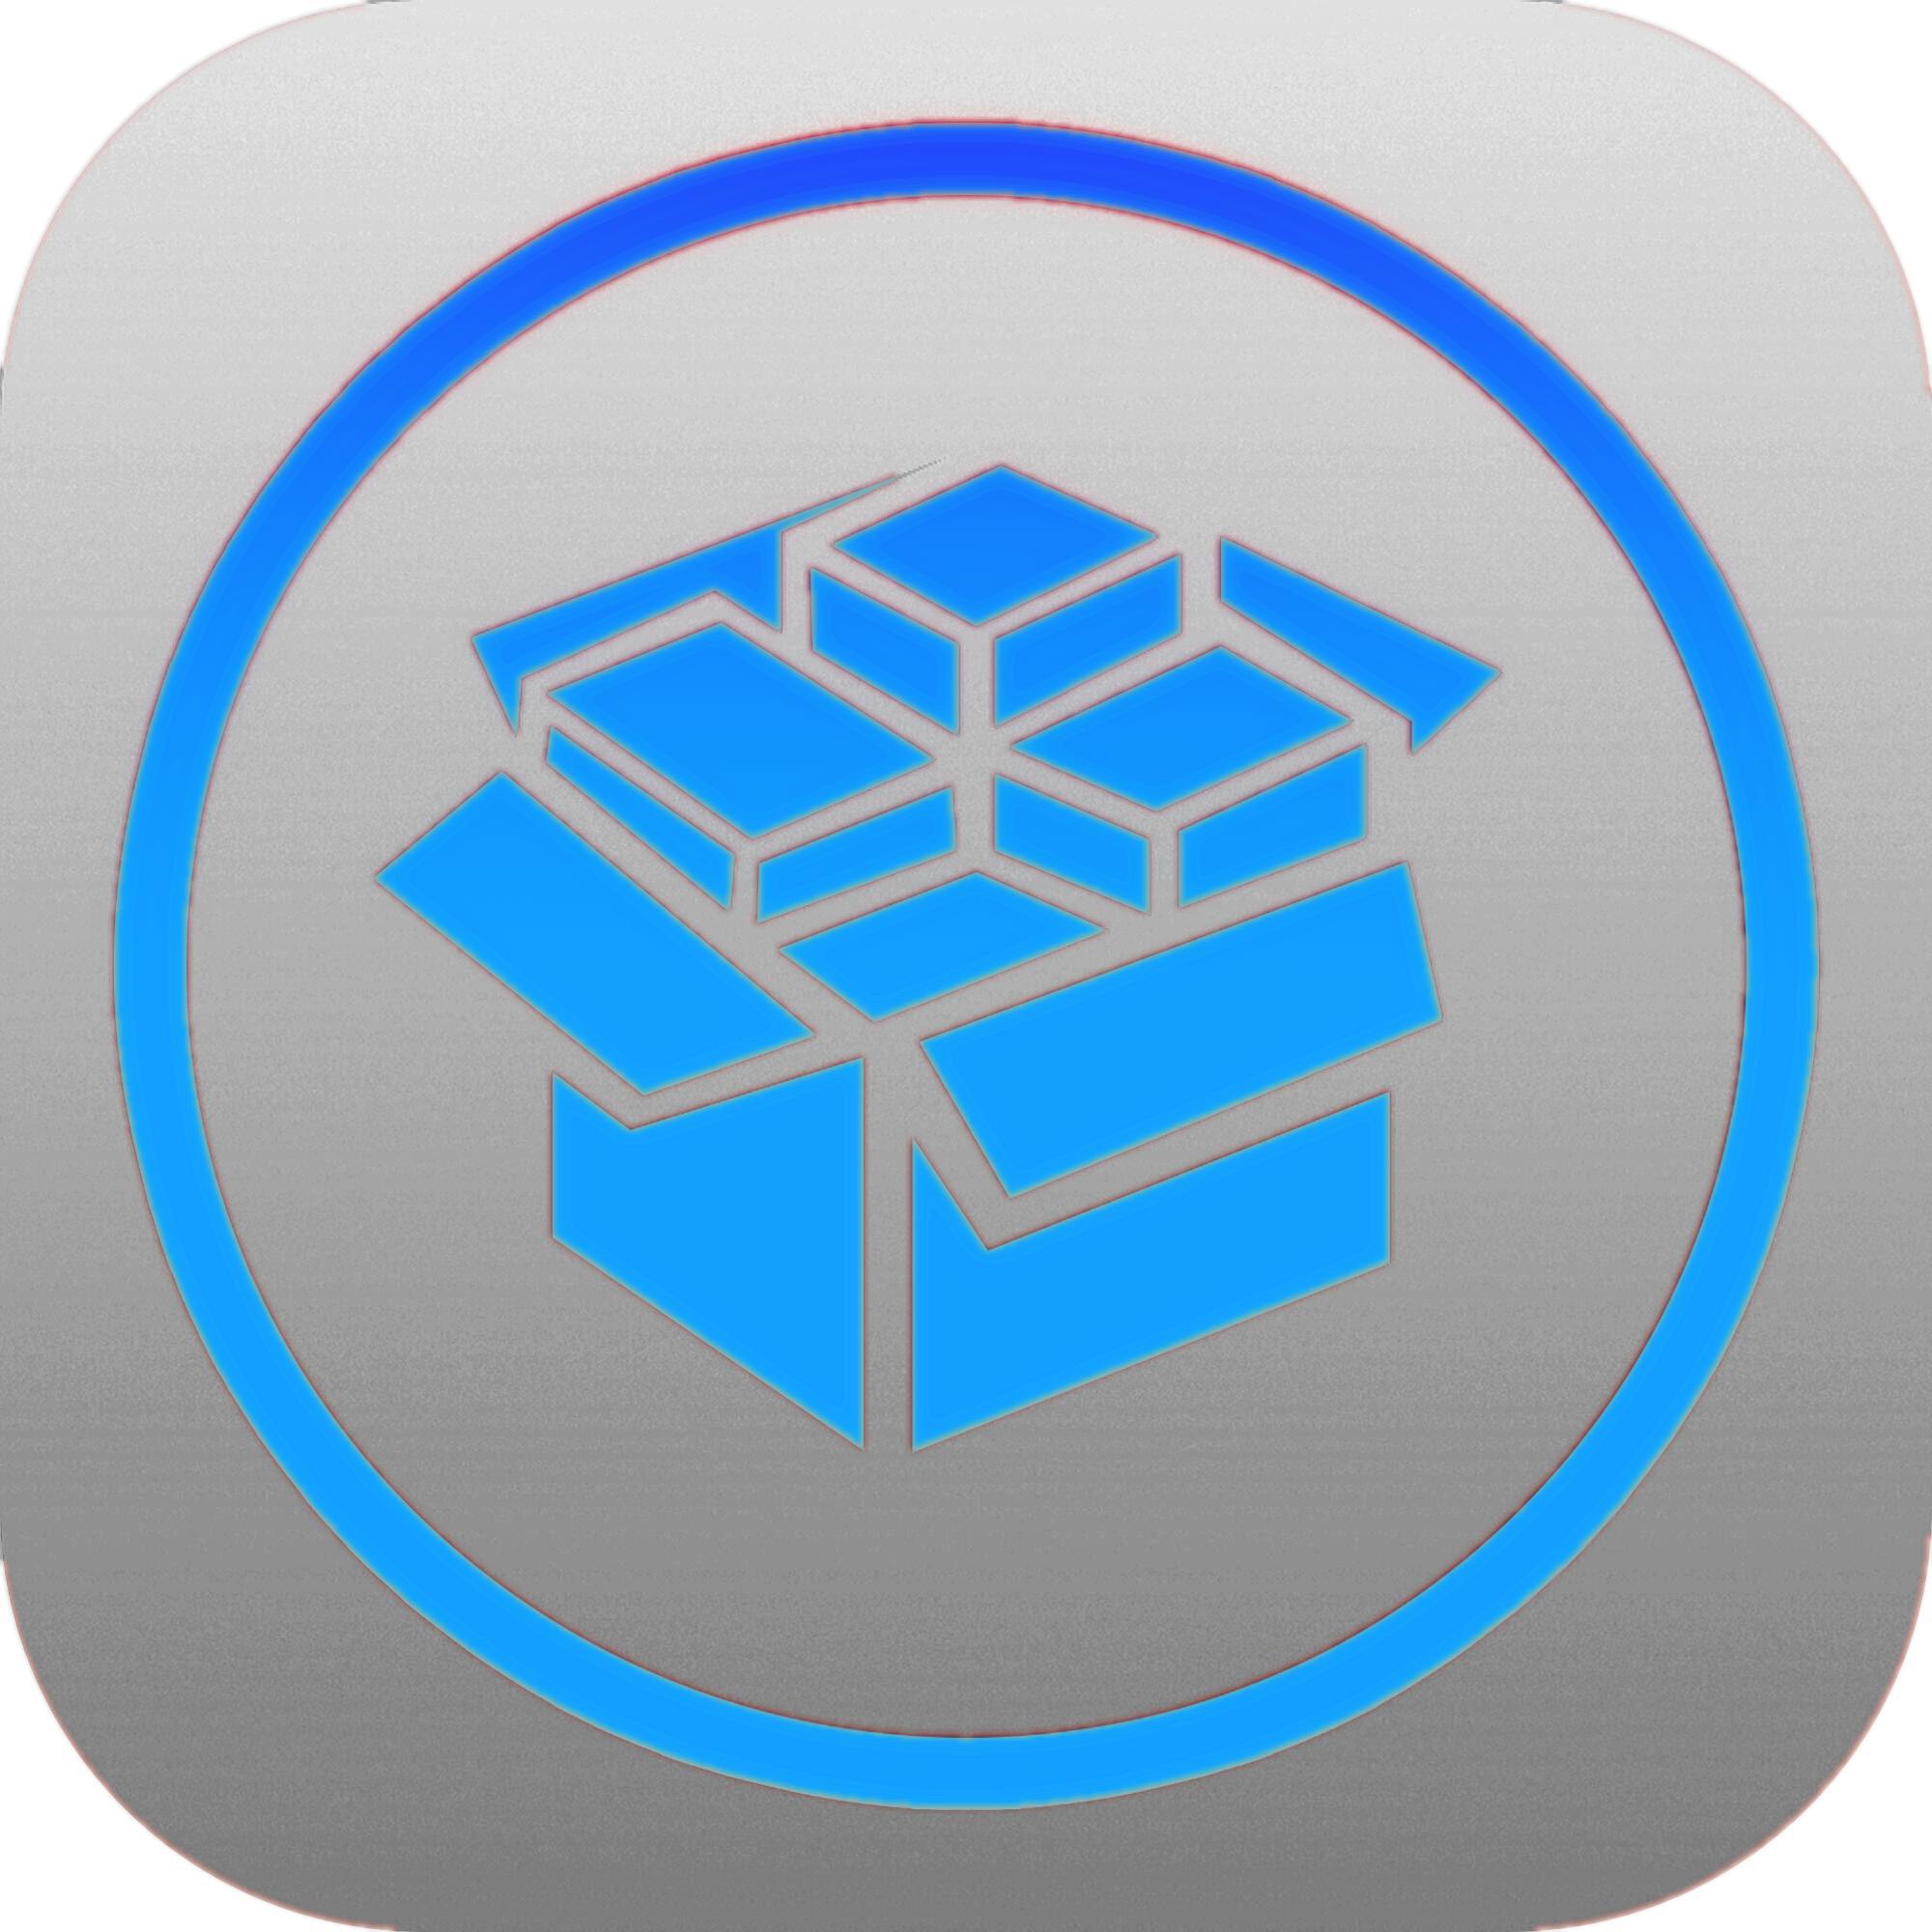 Cydia Logo - I've noticed that many people have designed their own version of the ...